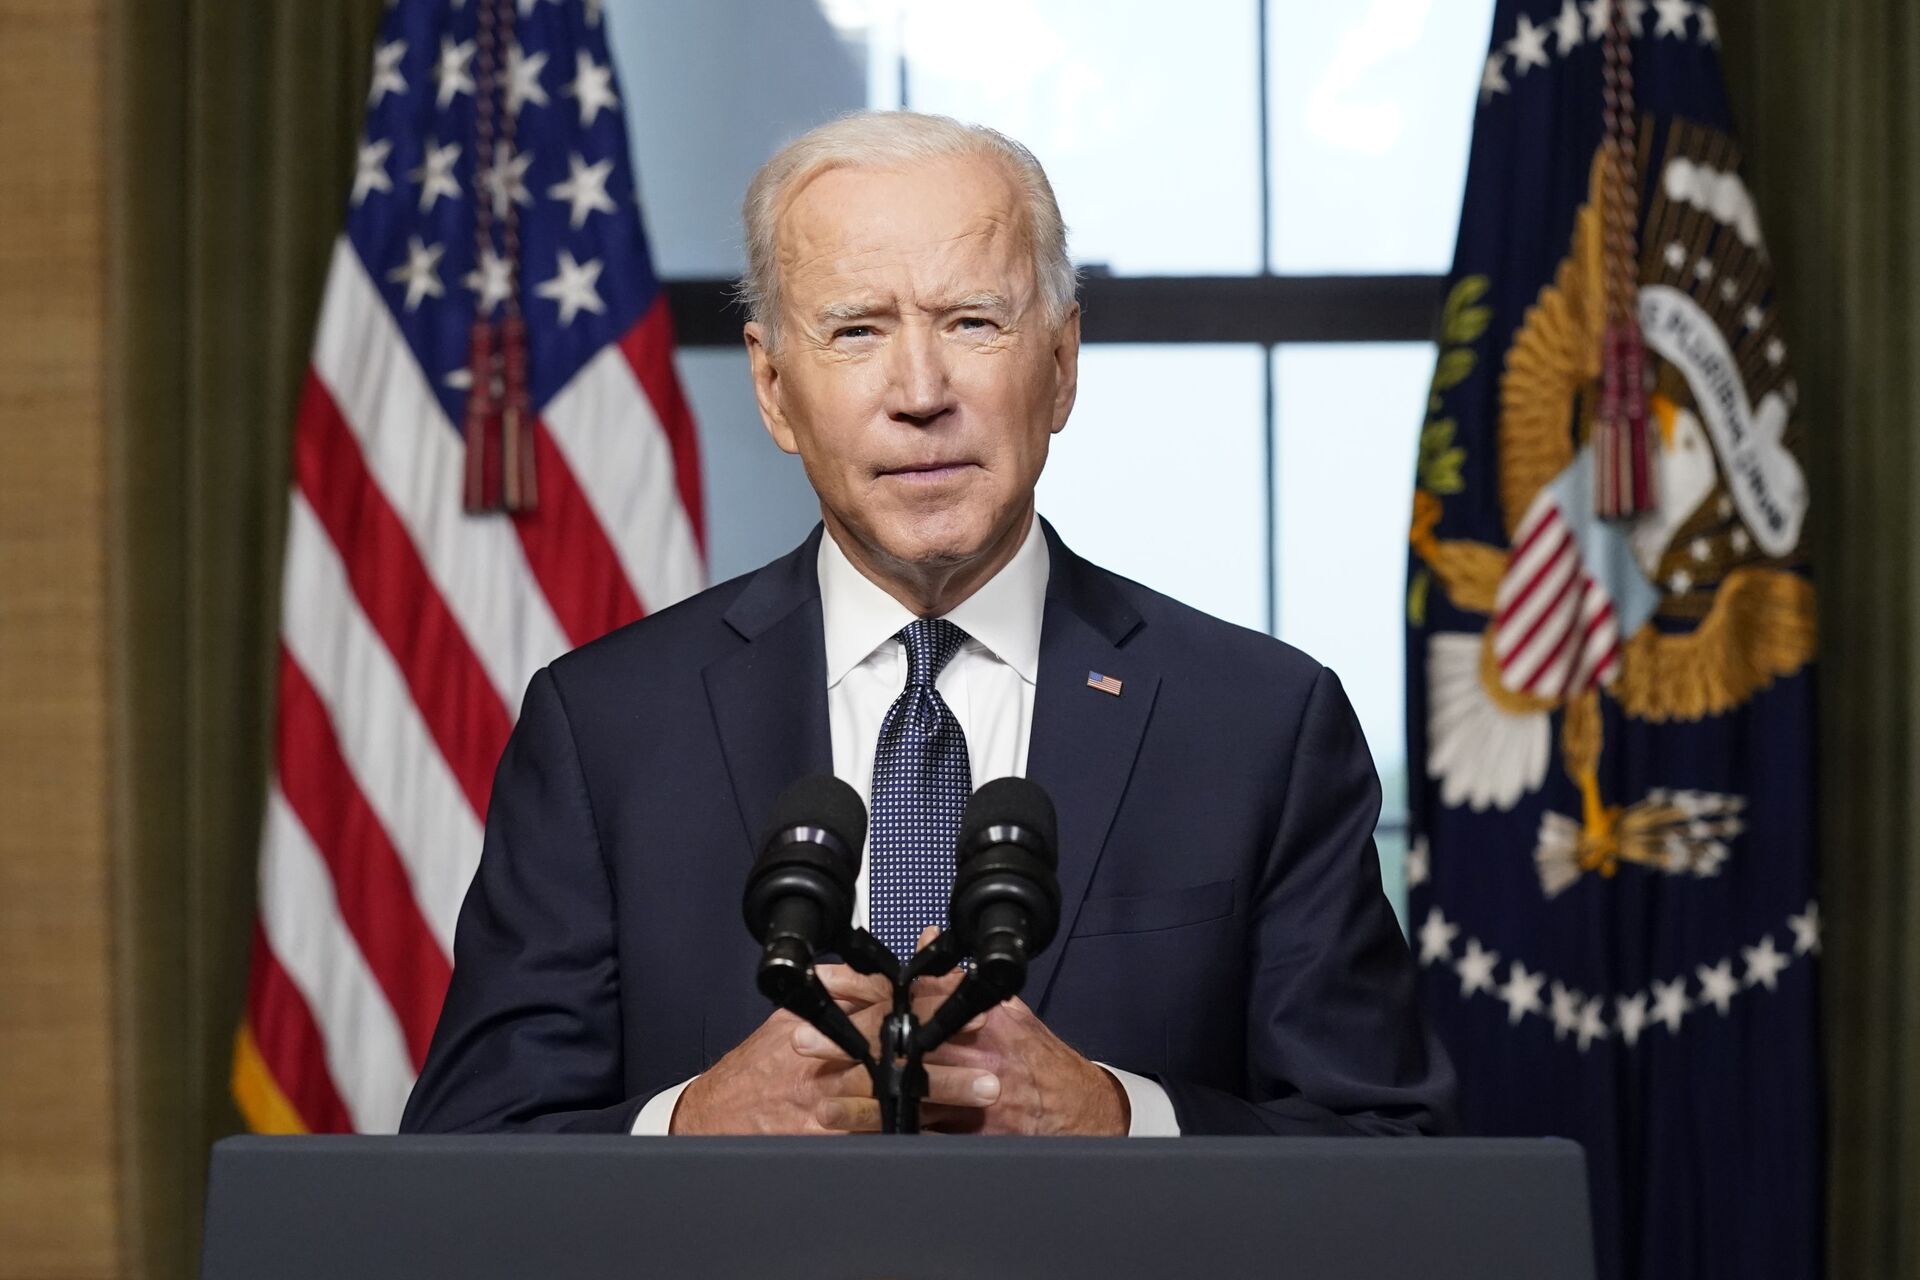 COVID-19 Pandemic, Economy, Racial Justice, Gun Laws and Climate: Biden Gears Up to Address Congress - Sputnik International, 1920, 28.04.2021